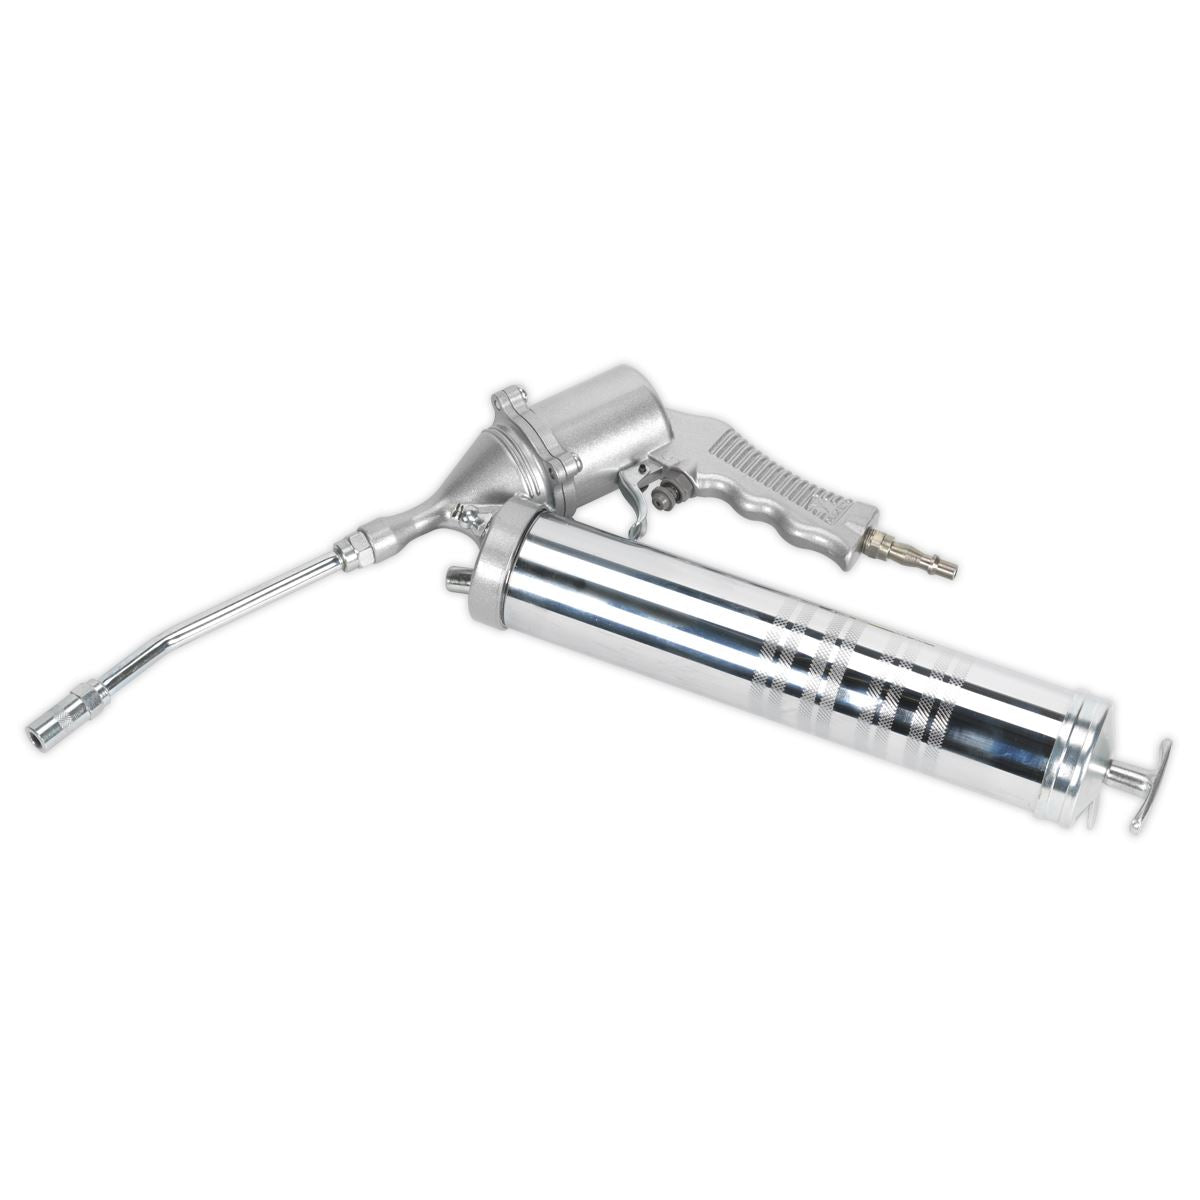 Sealey Air Operated Continuous Flow Grease Gun - Pistol Type